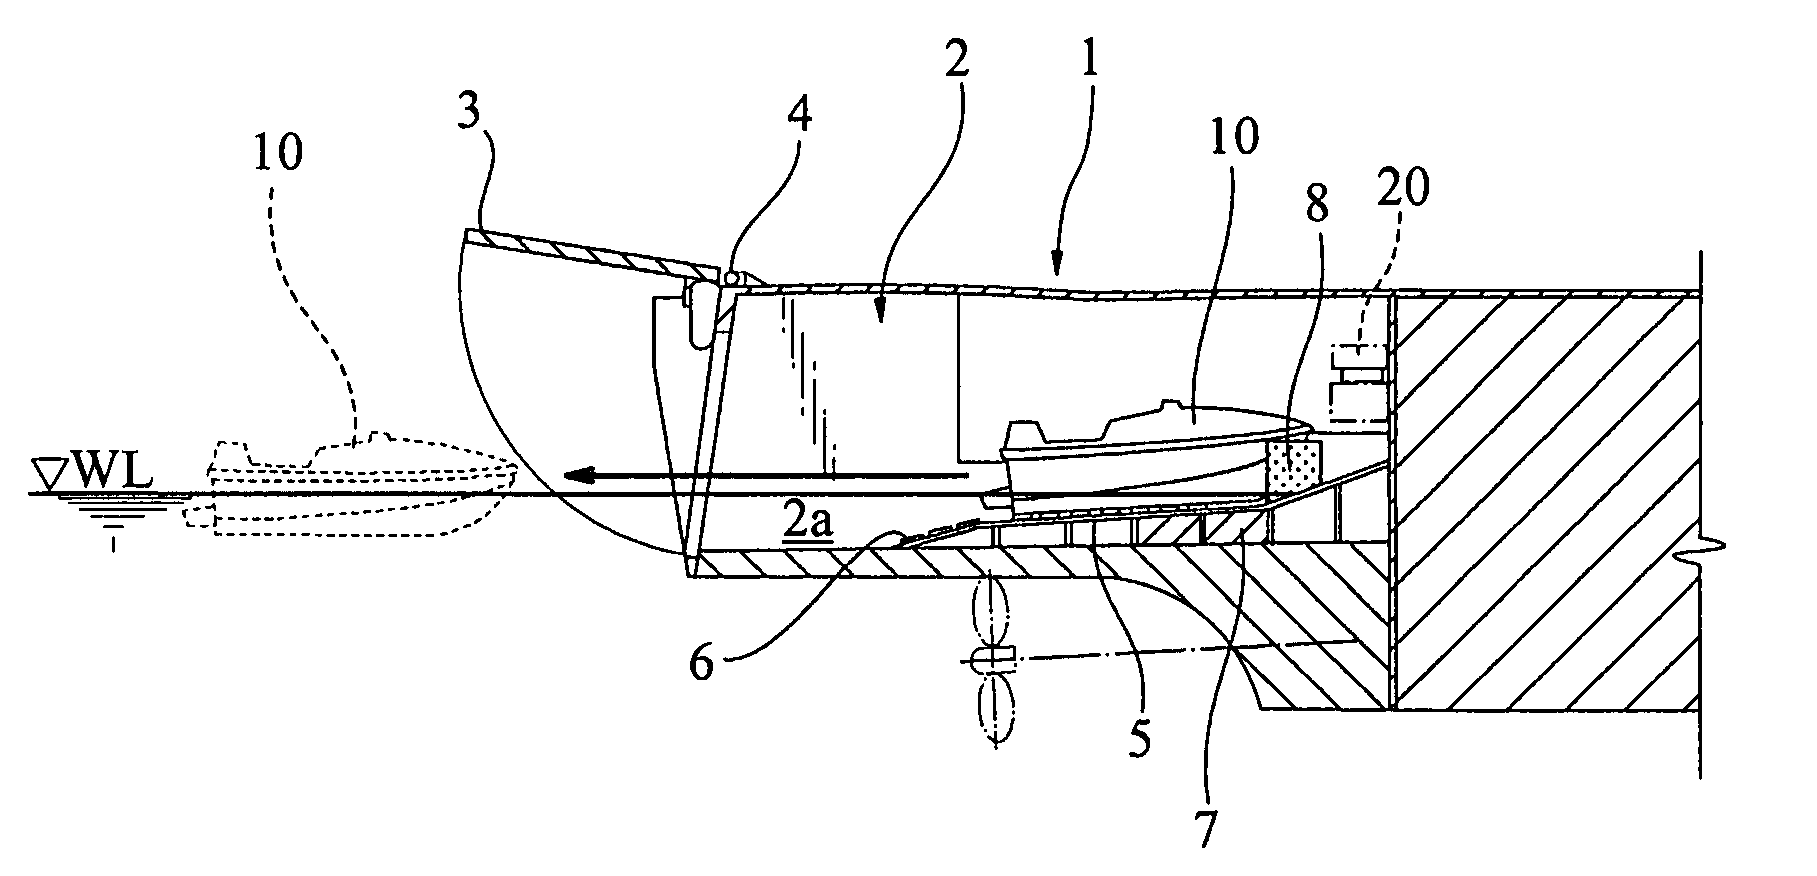 Apparatus and method for drop-down/lift-up boat mounted on marine vessel